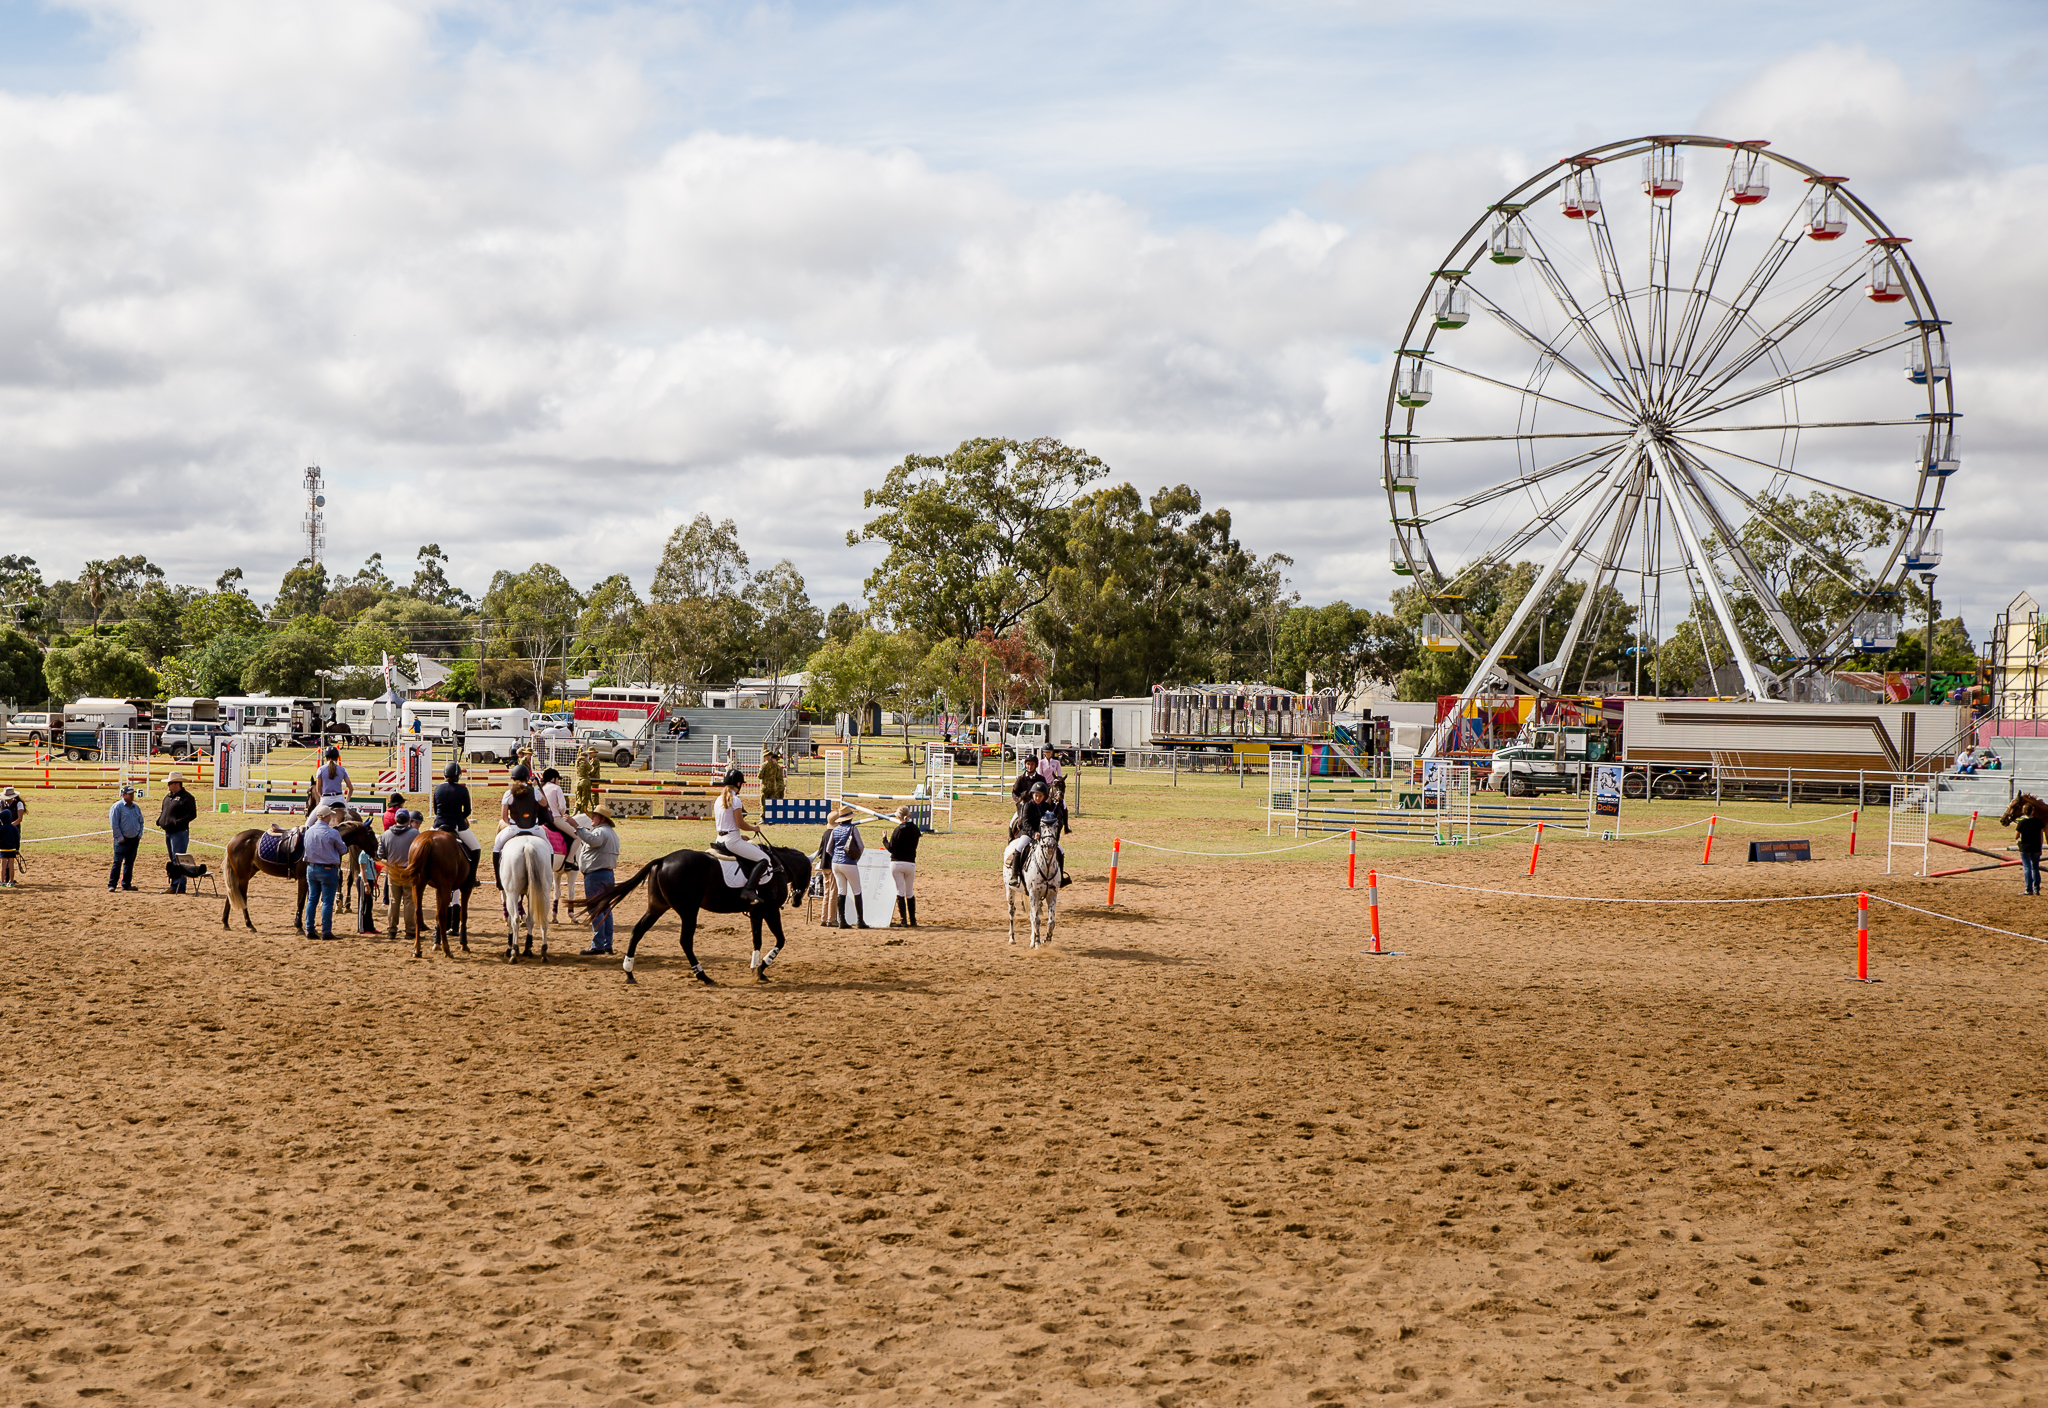 Things to do in Dalby, Dalby showgrounds